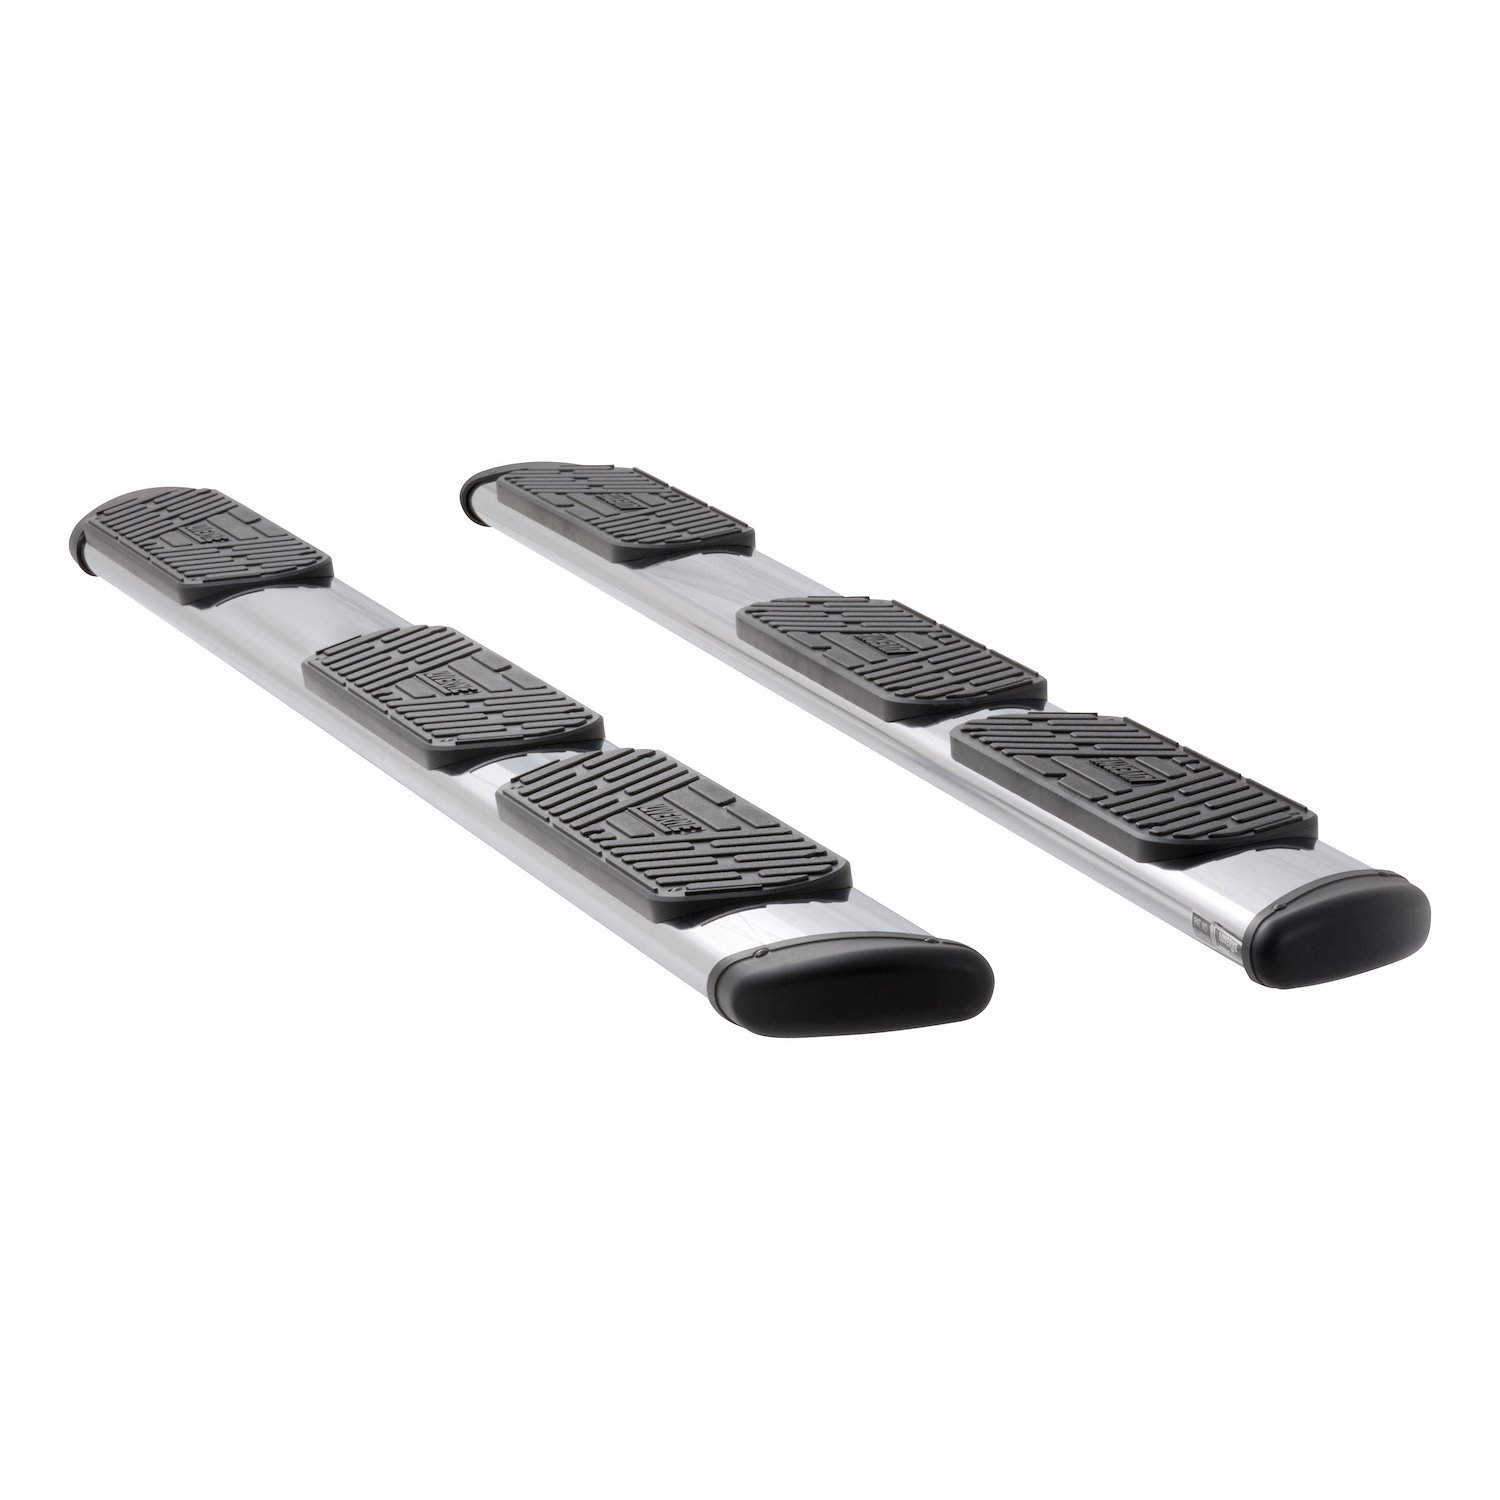 477113-401747 Regal 7 Polished Stainless 113 in. Oval W2W Steps Fits Select Chevy Silverado, GMC Sierra HD